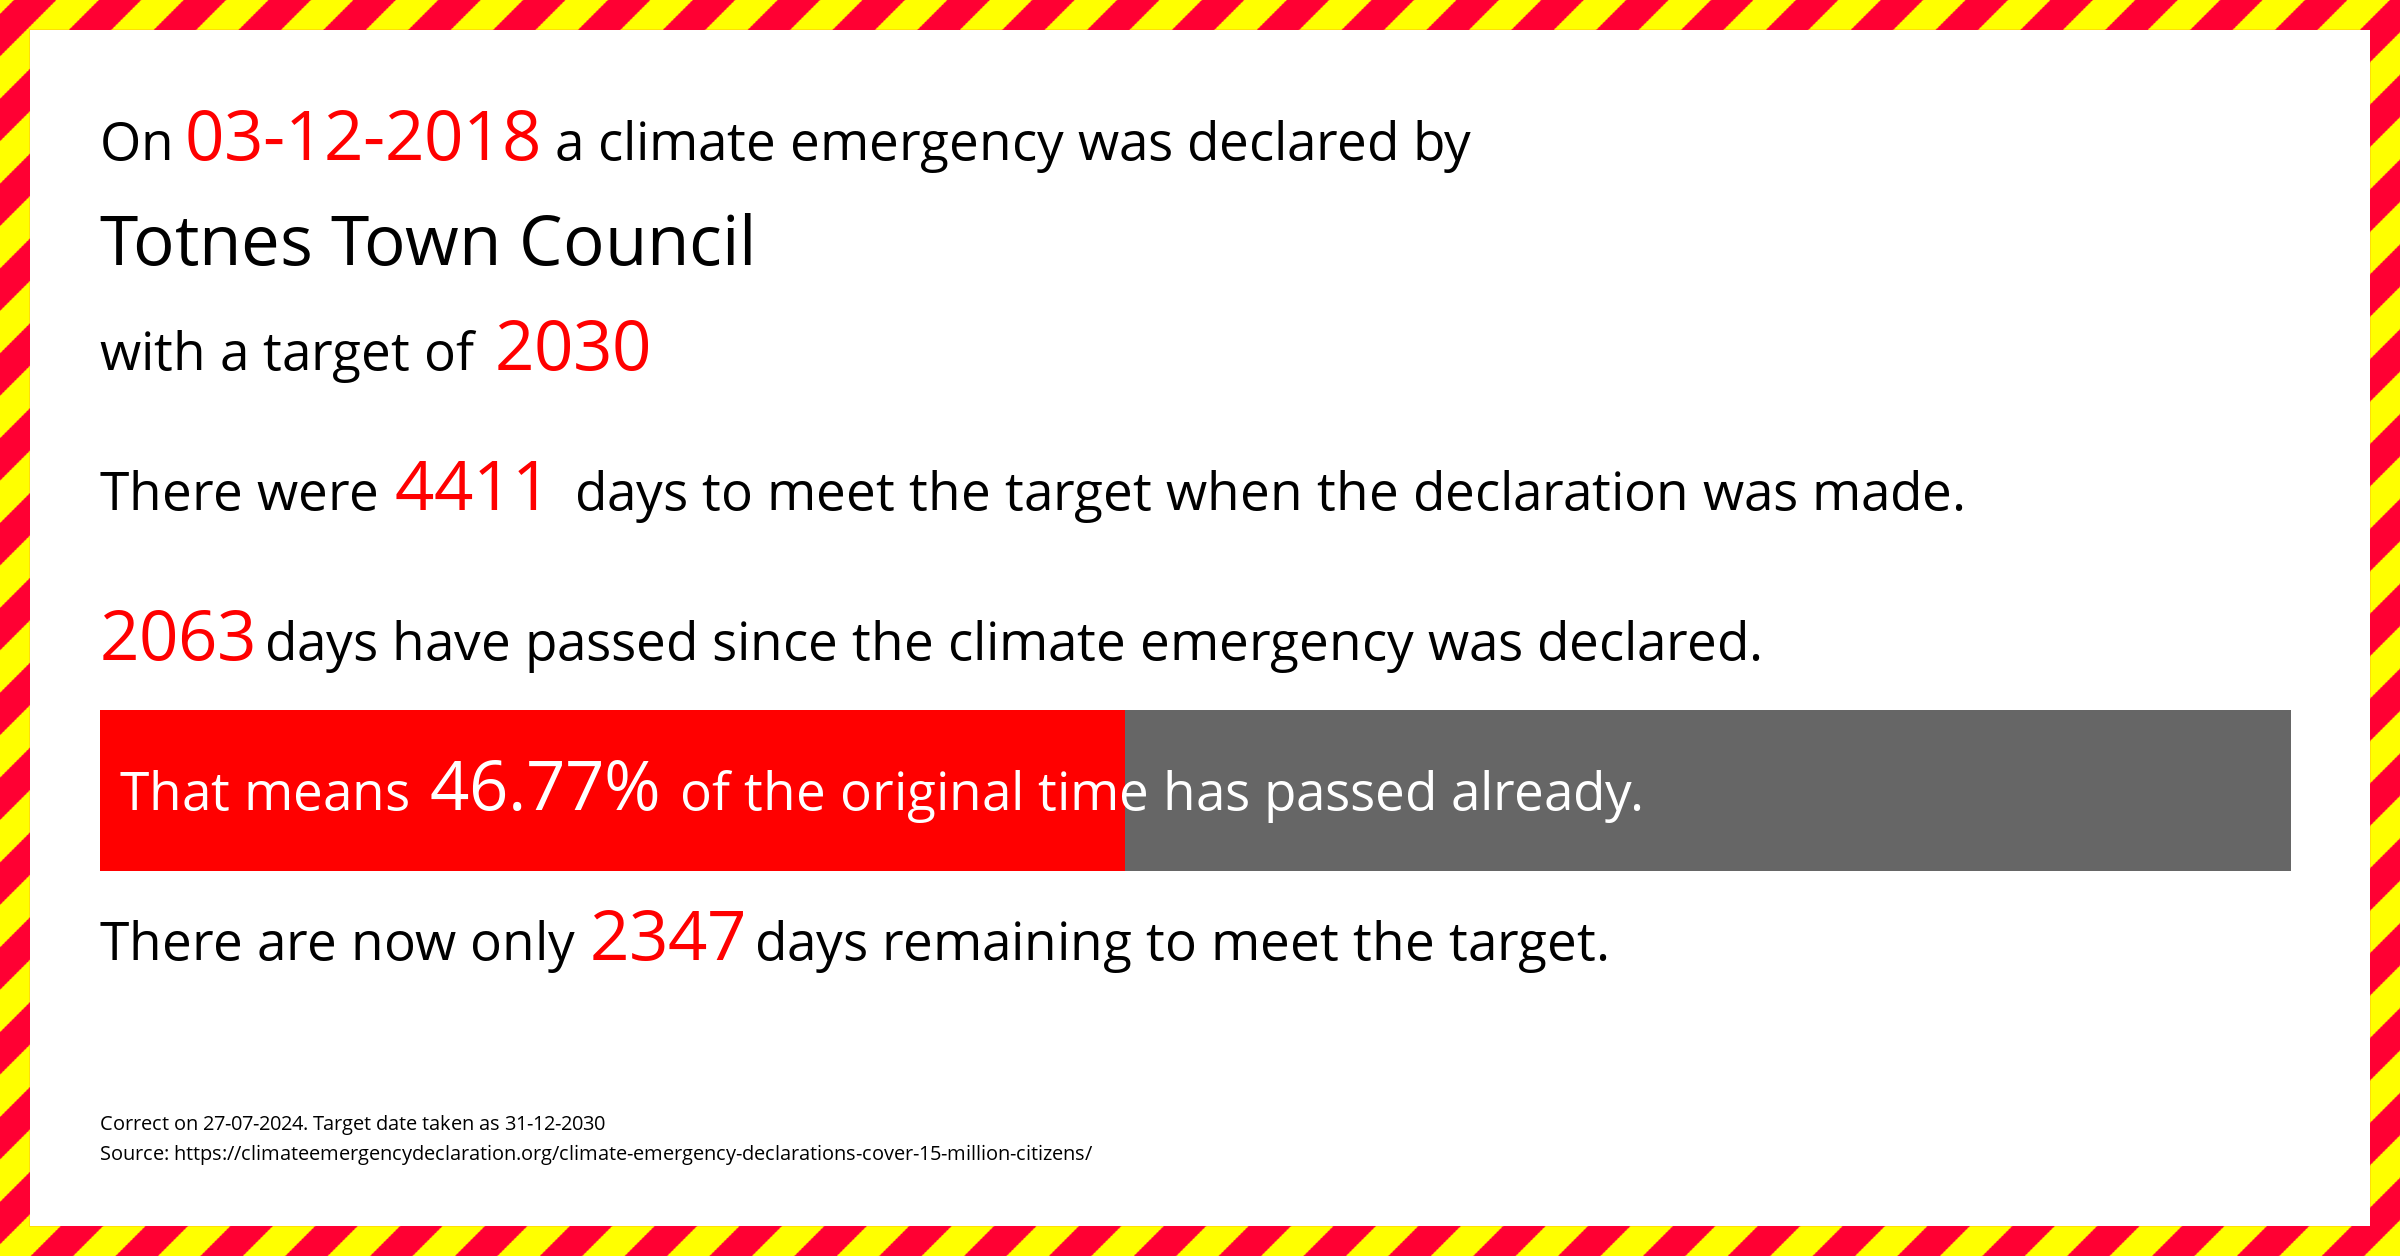 Totnes Town Council declared a Climate emergency on Monday 3rd December 2018, with a target of 2030.